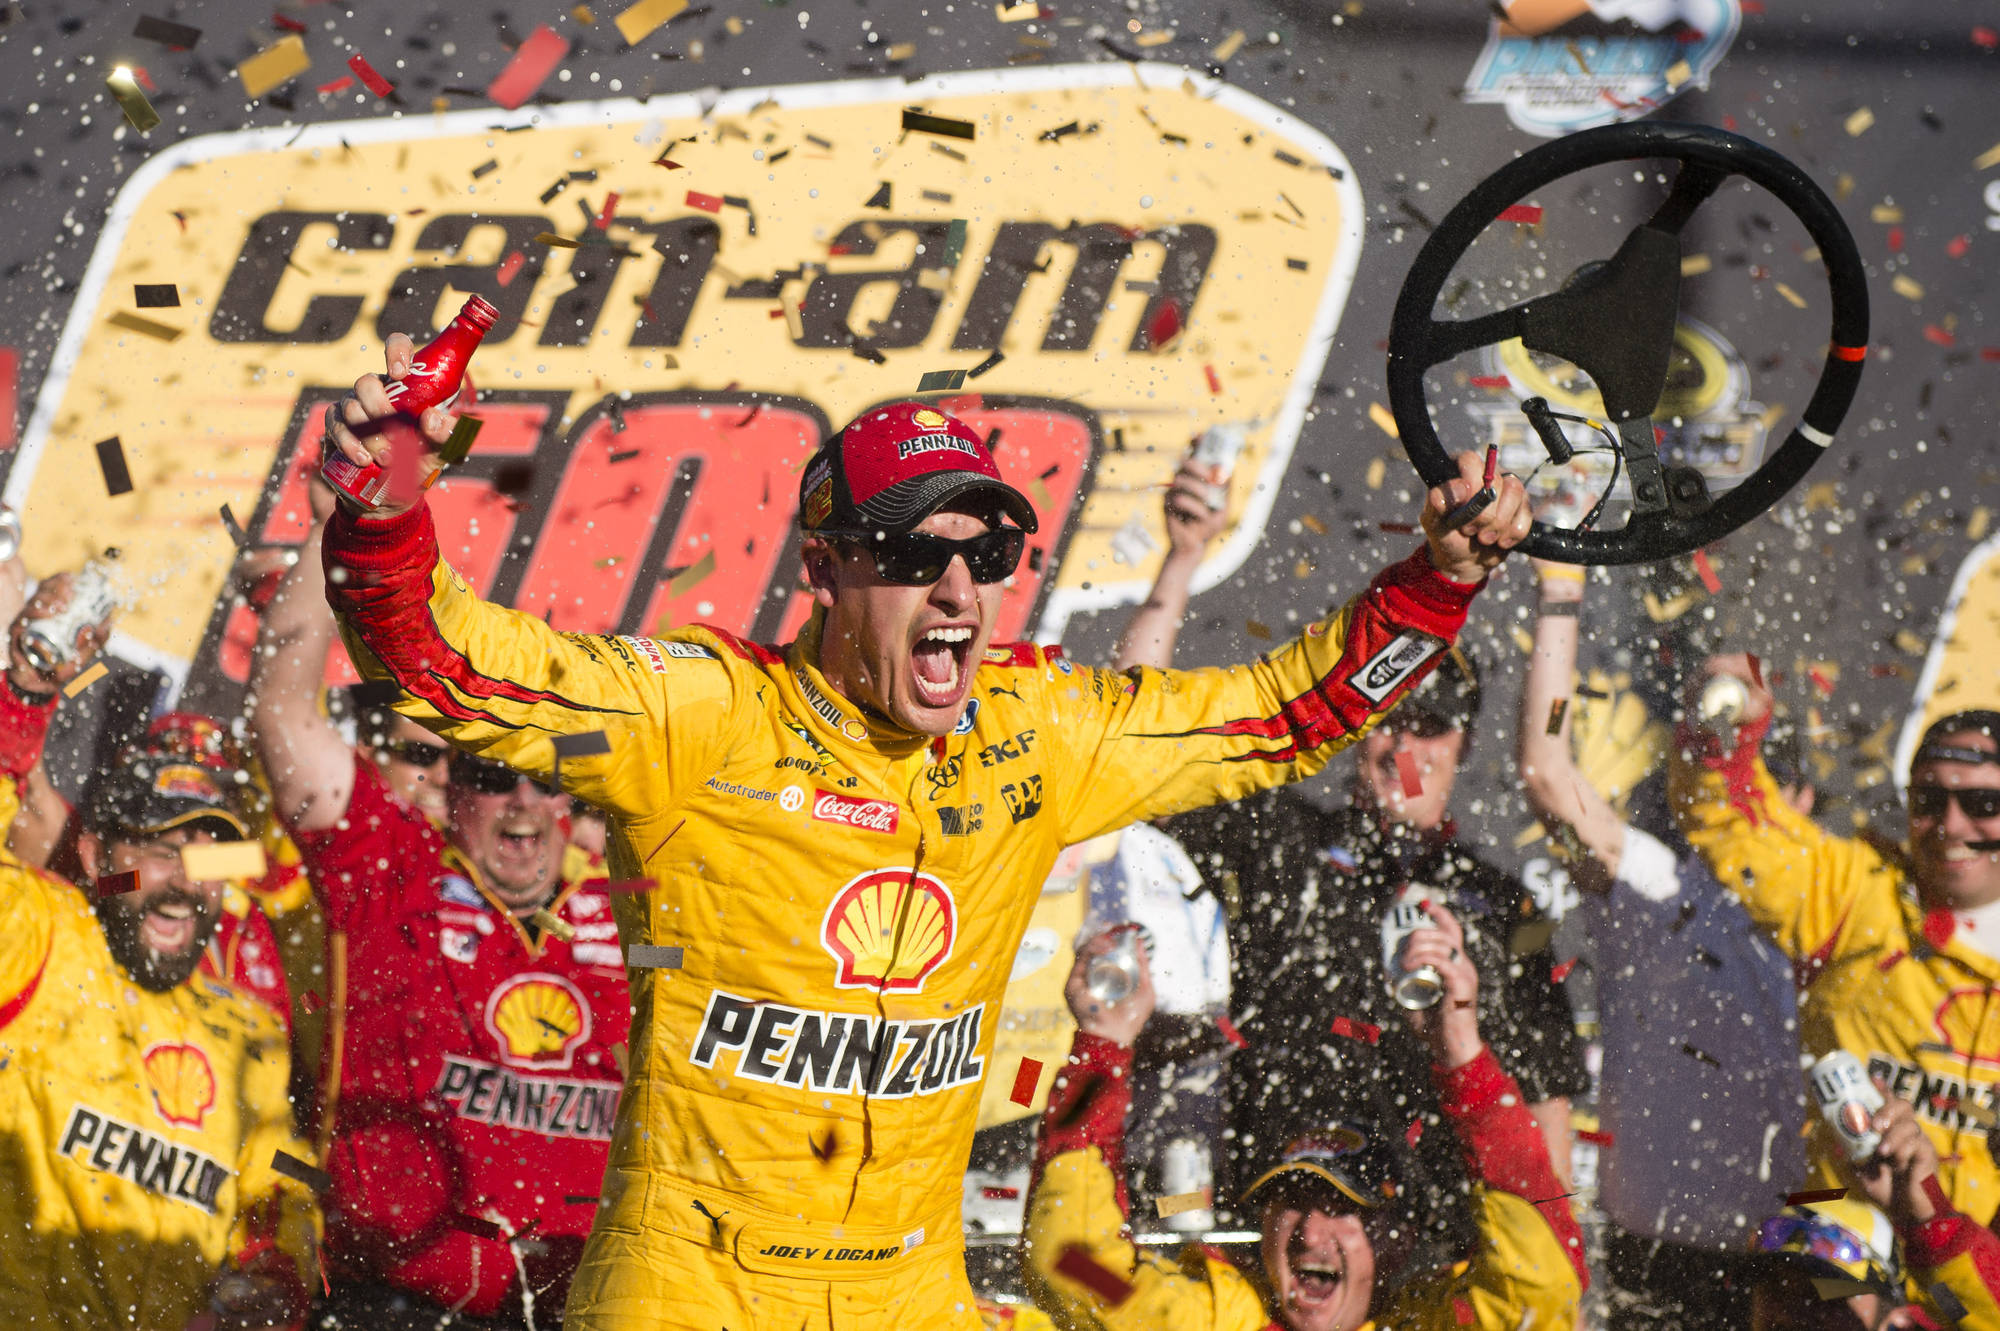 Logano Gets Title Shot At Homestead With Win At Phoenix